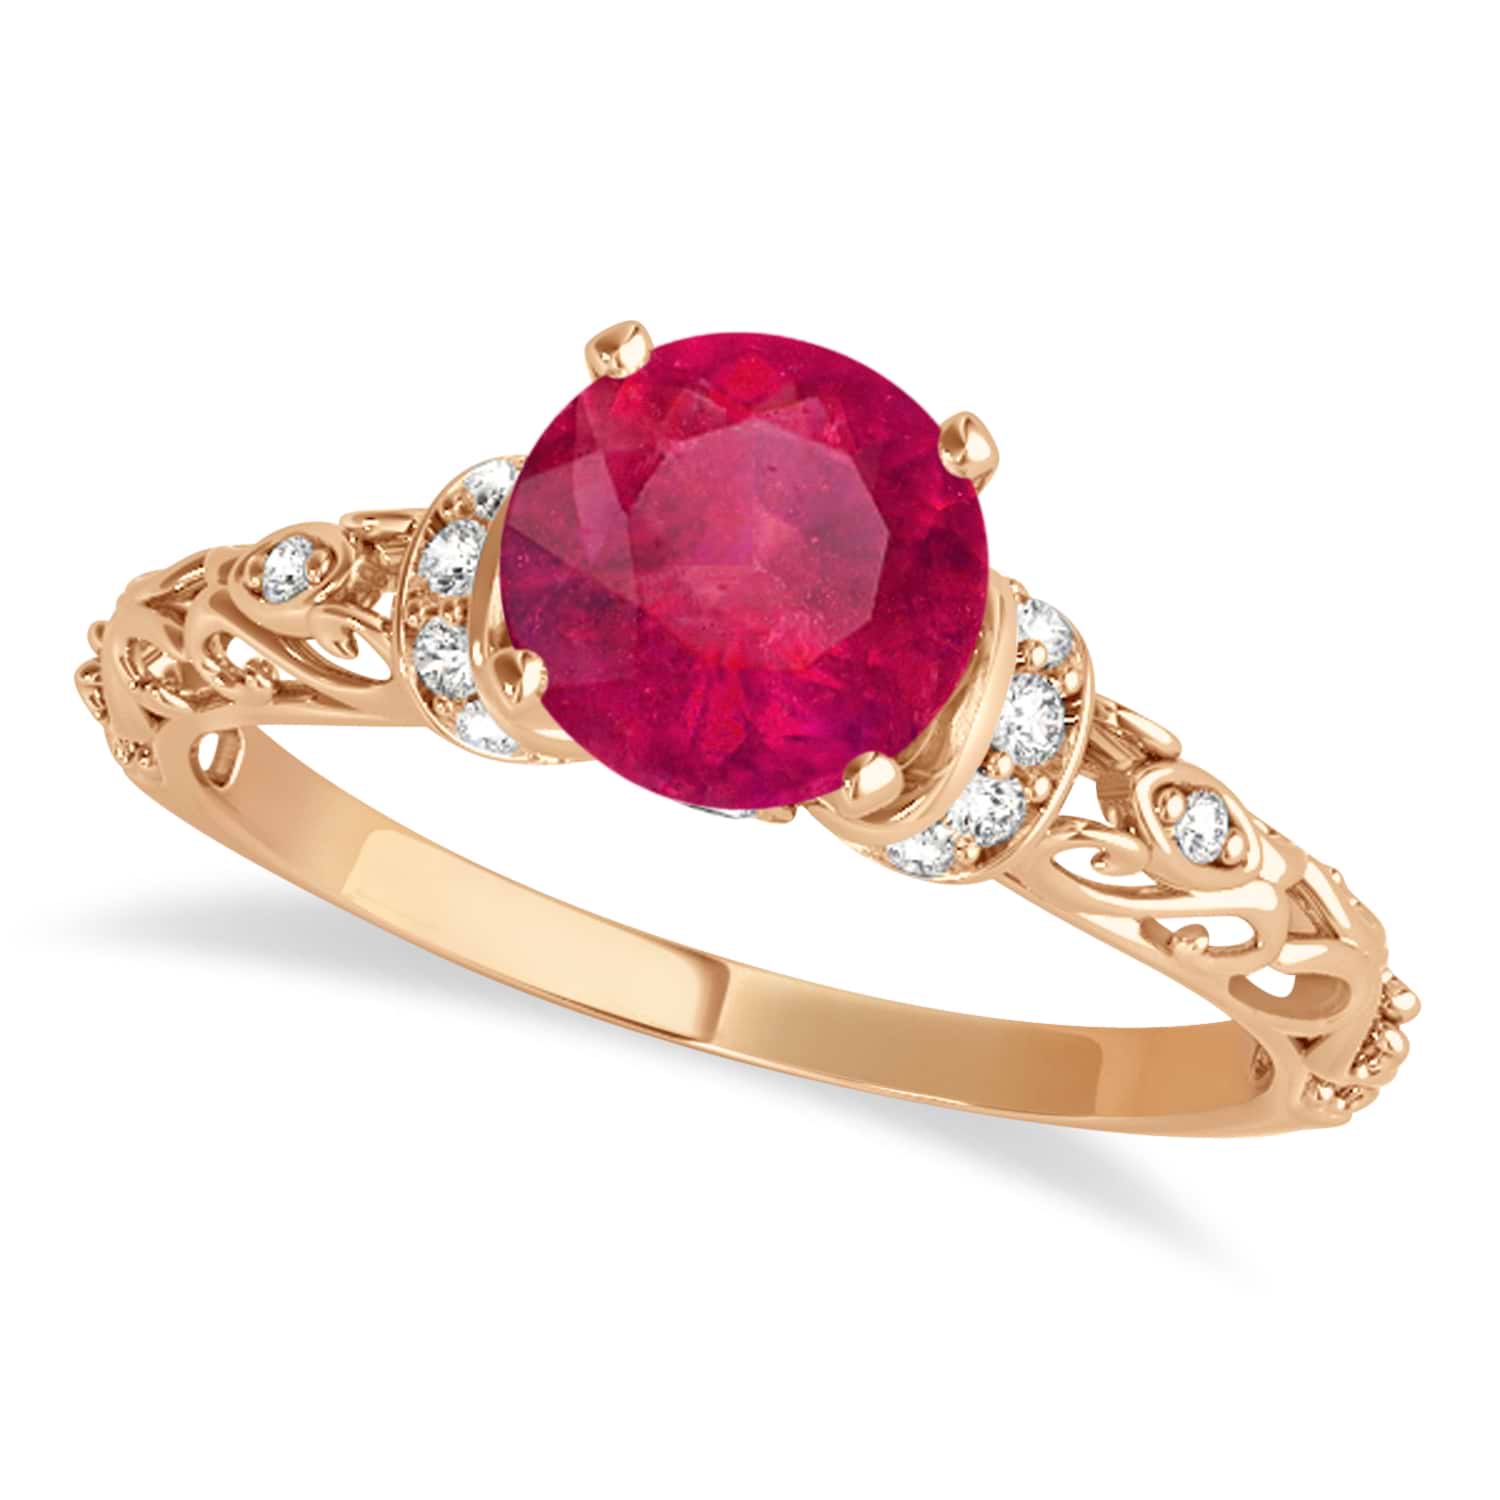 Ruby & Diamond Antique Style Engagement Ring 14k Rose Gold (1.12ct)